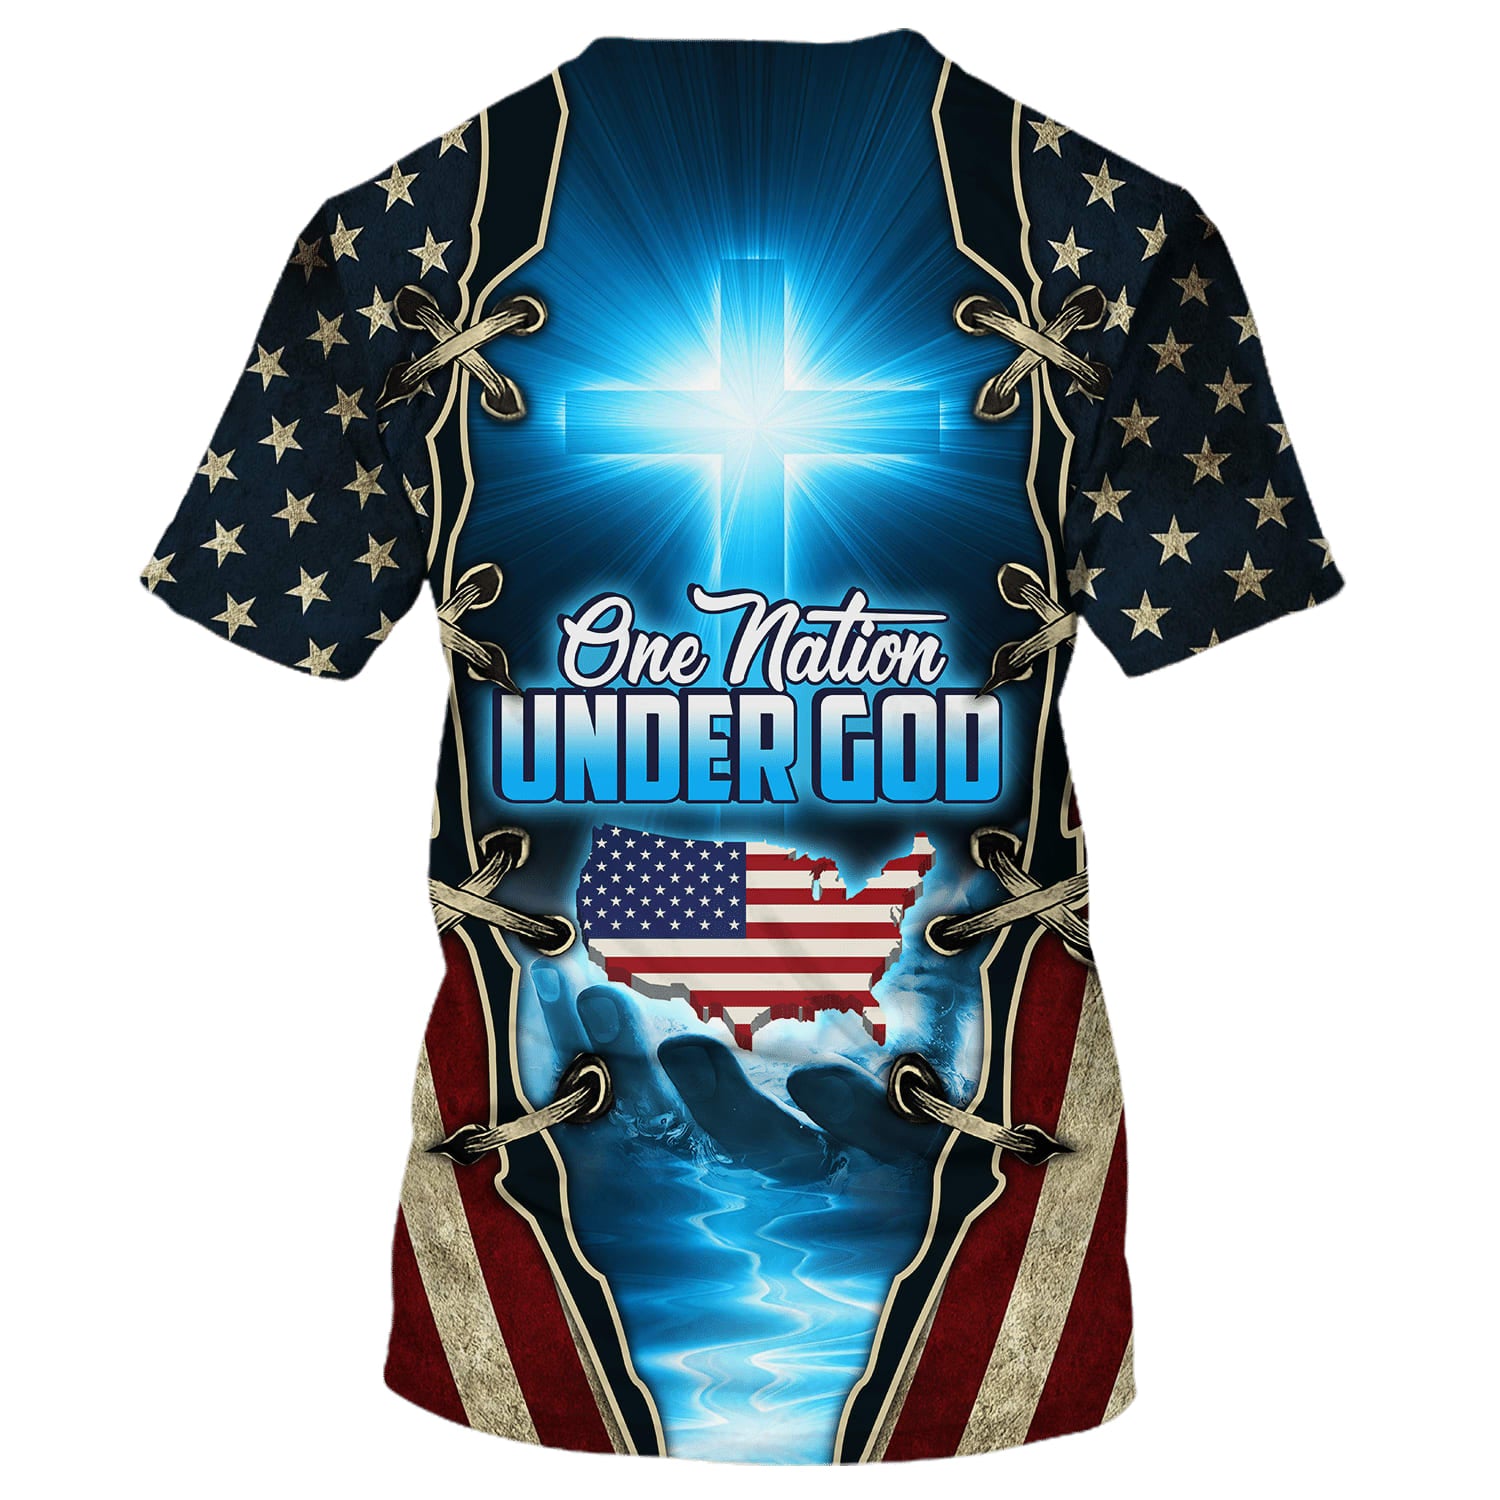 One Nation Under God Patriotic 3d Shirts - Christian T Shirts For Men And Women